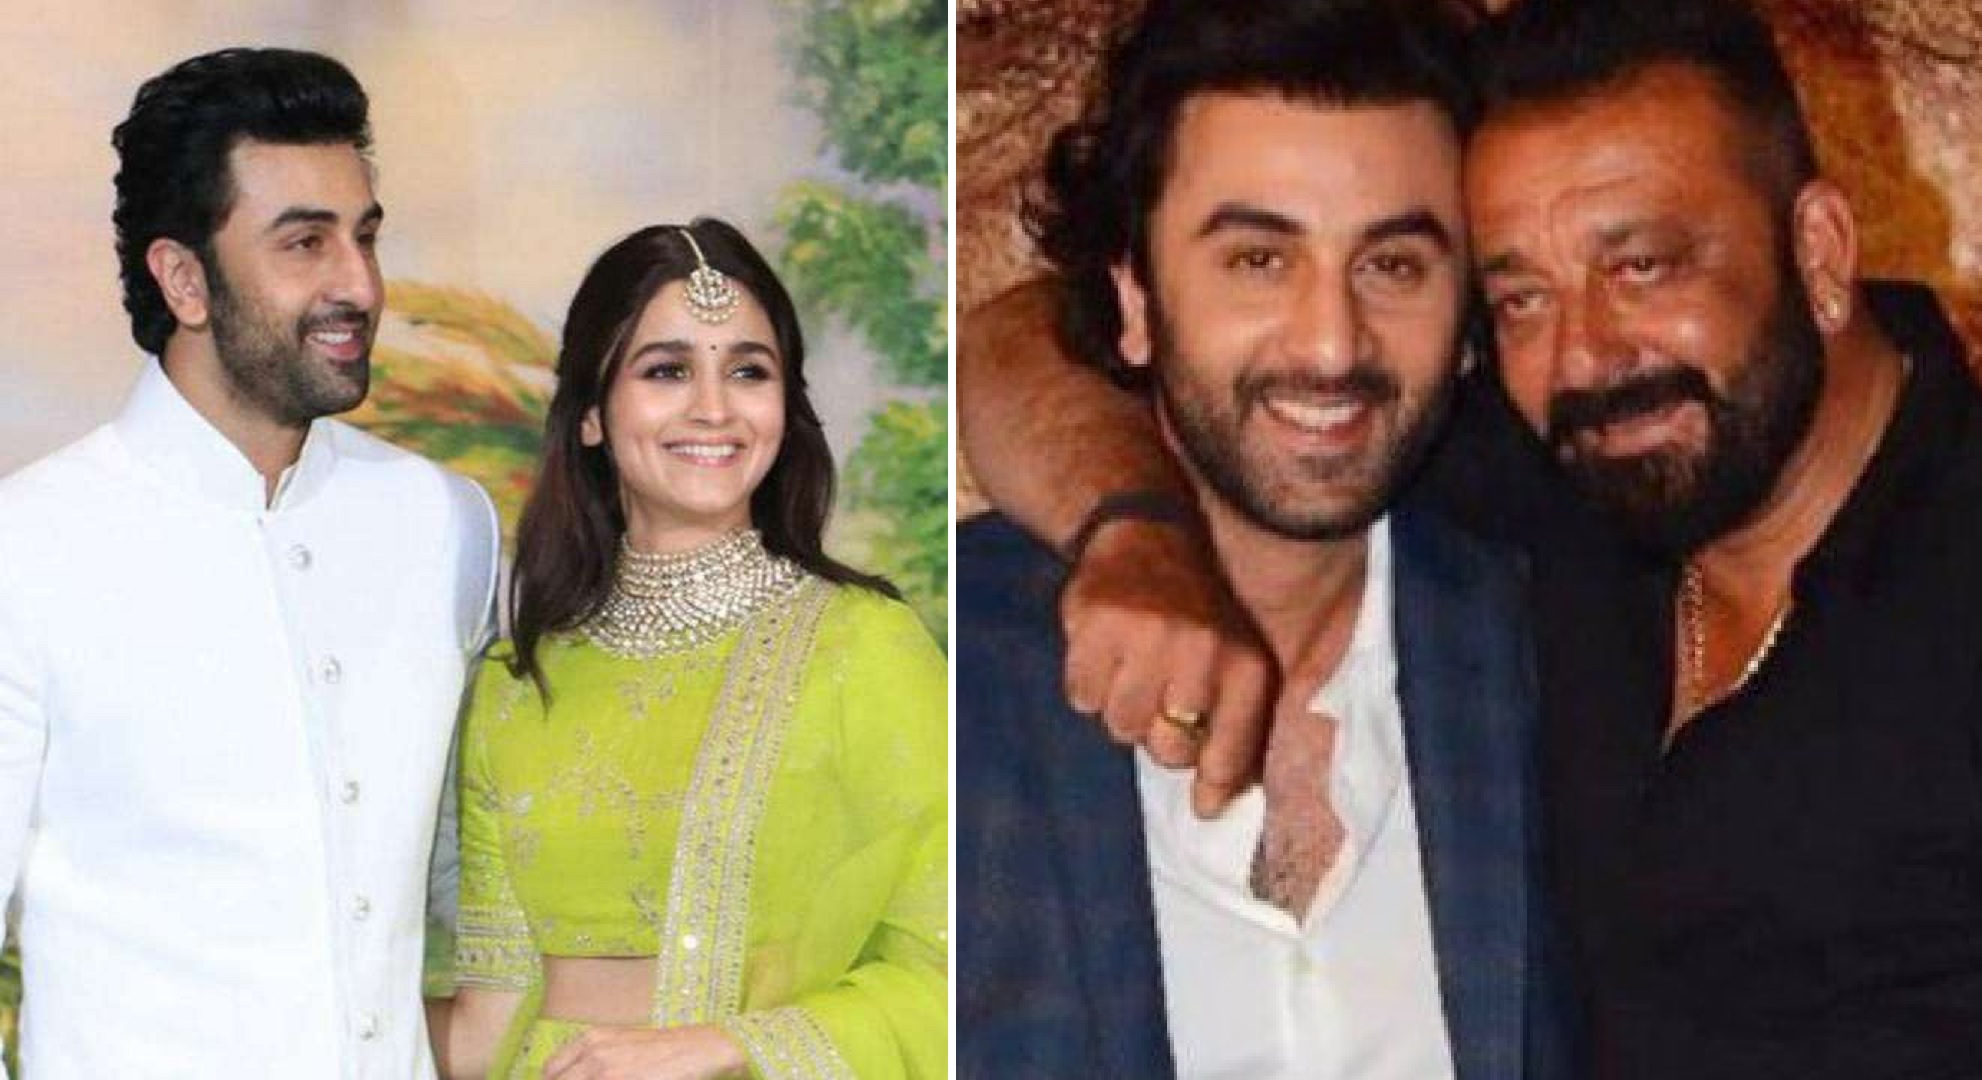 Sanjay Dutt Shares Marriage Advice To Ranbir & Alia: “It’s a matter of compromise from both ends”